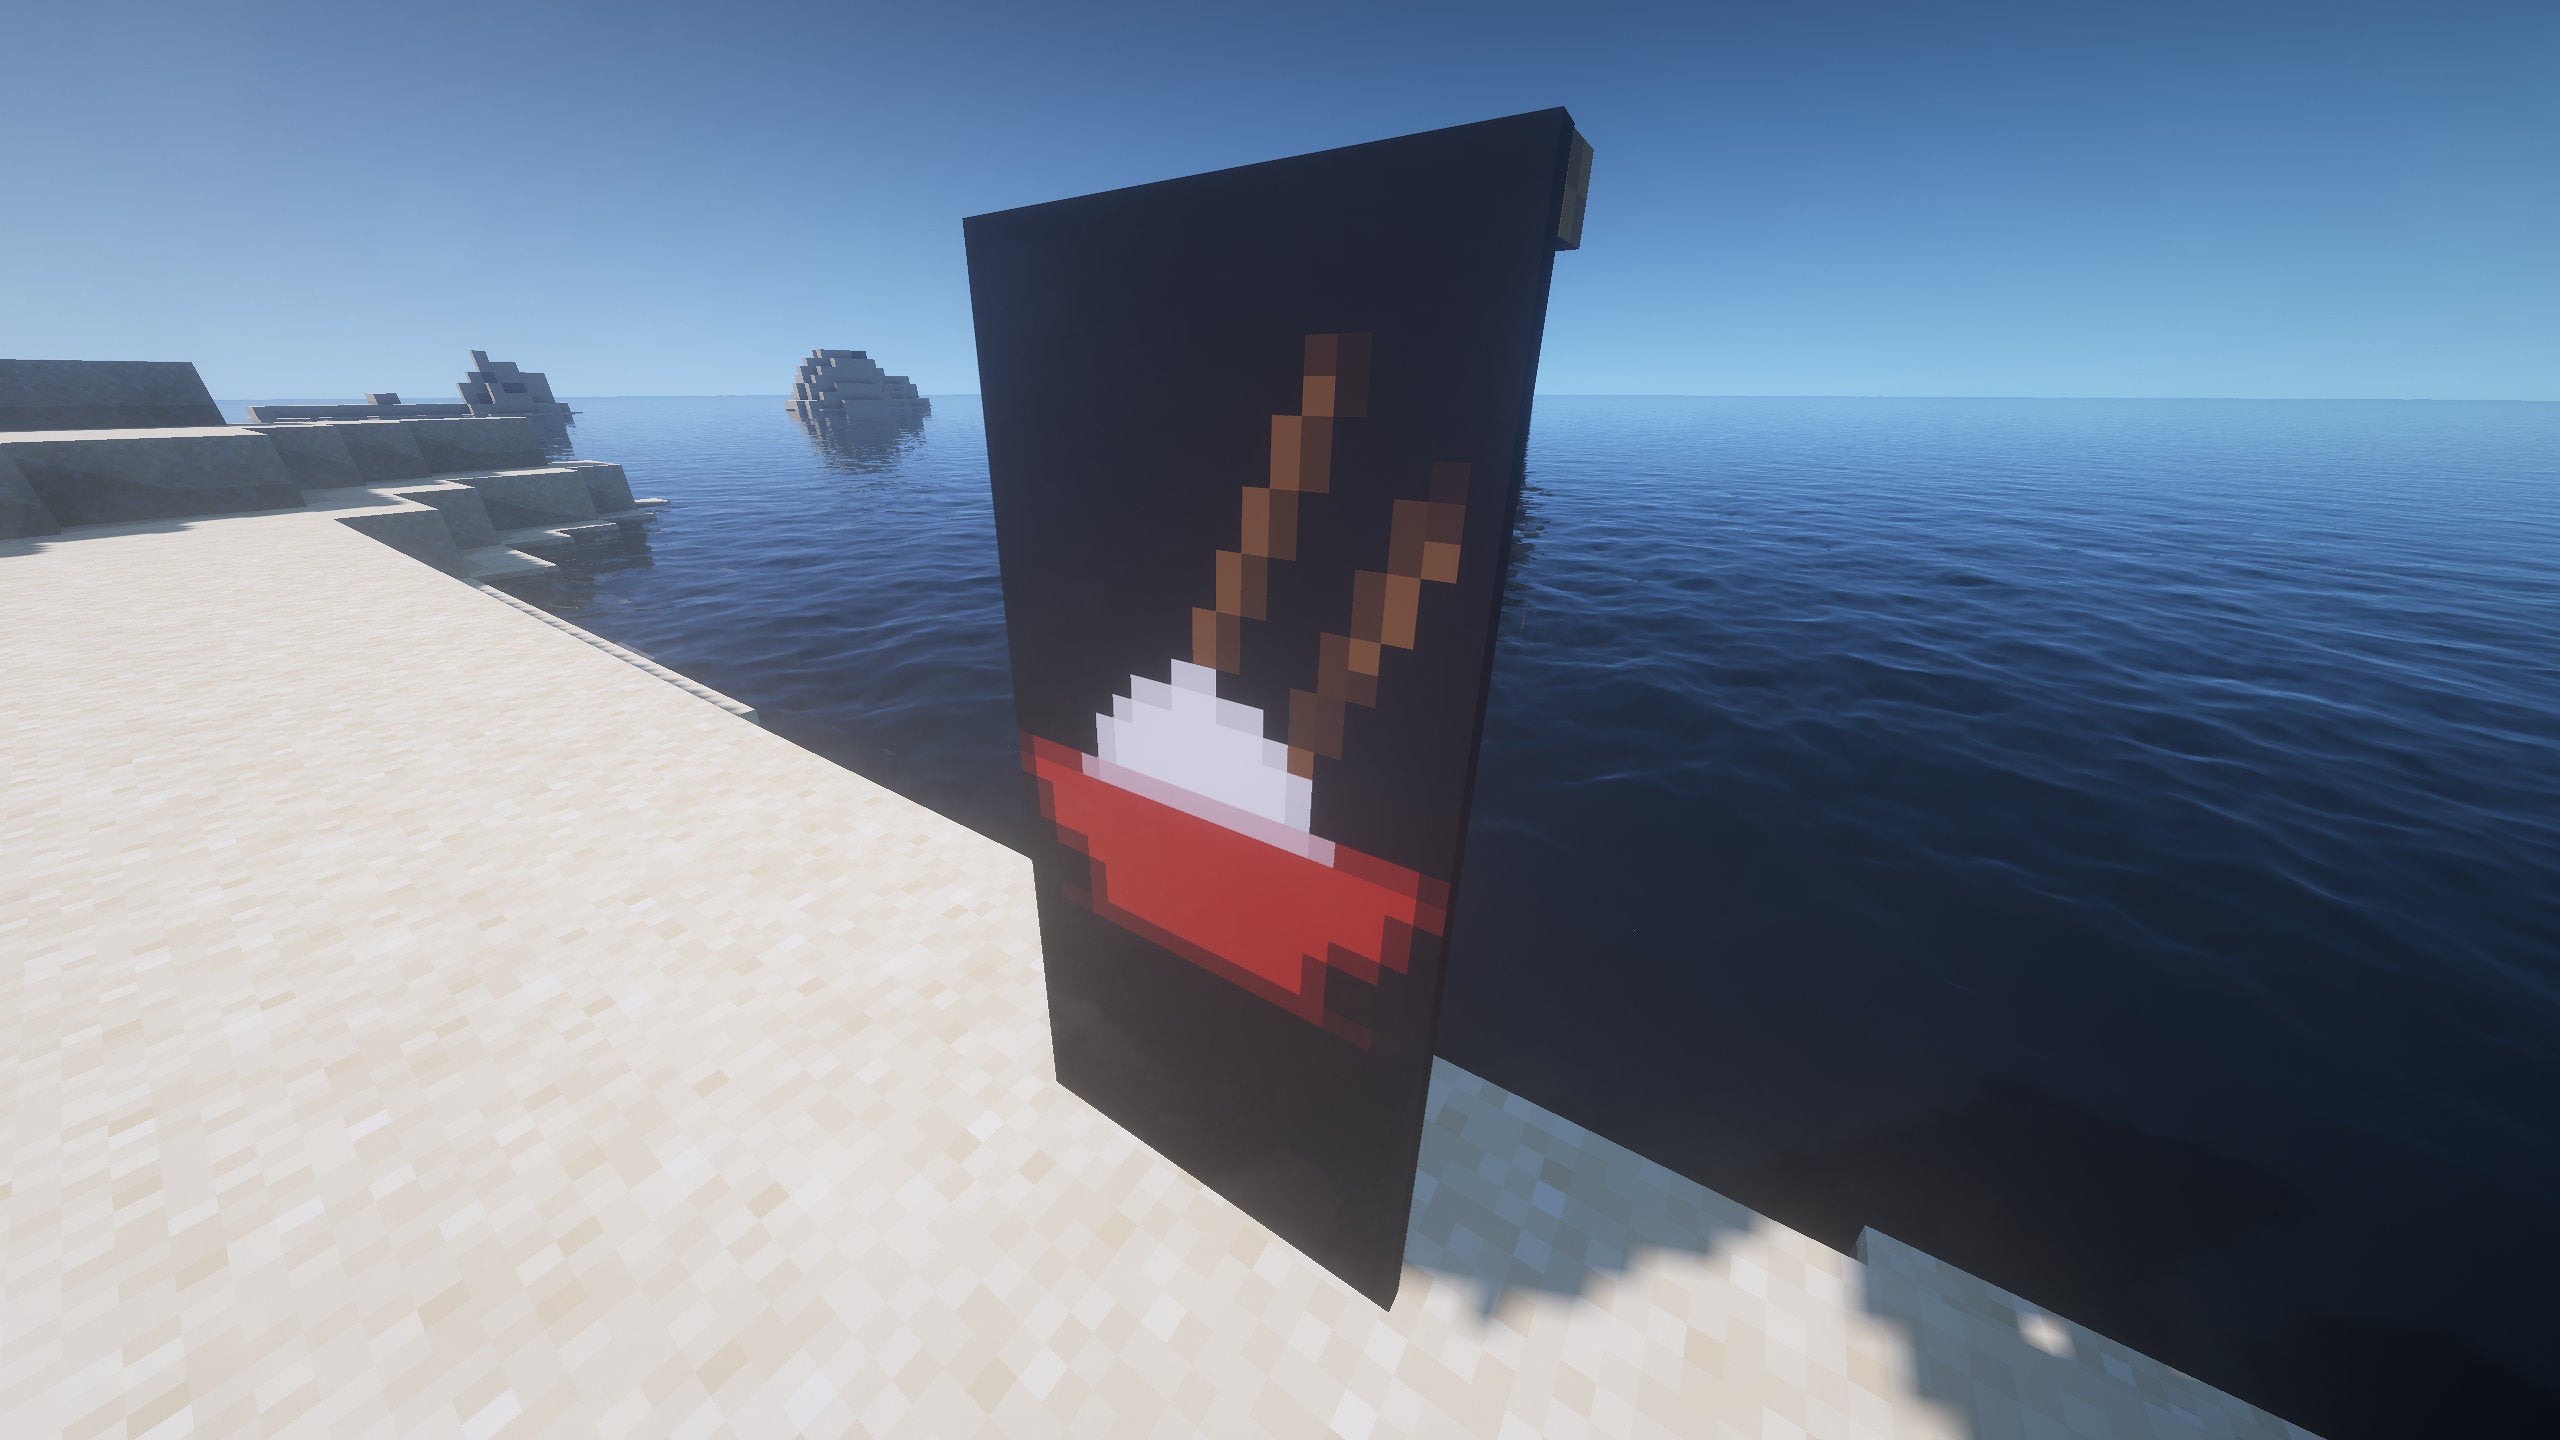 An Enderman eyes Banner in Minecraft, placed in the ground by the coast.